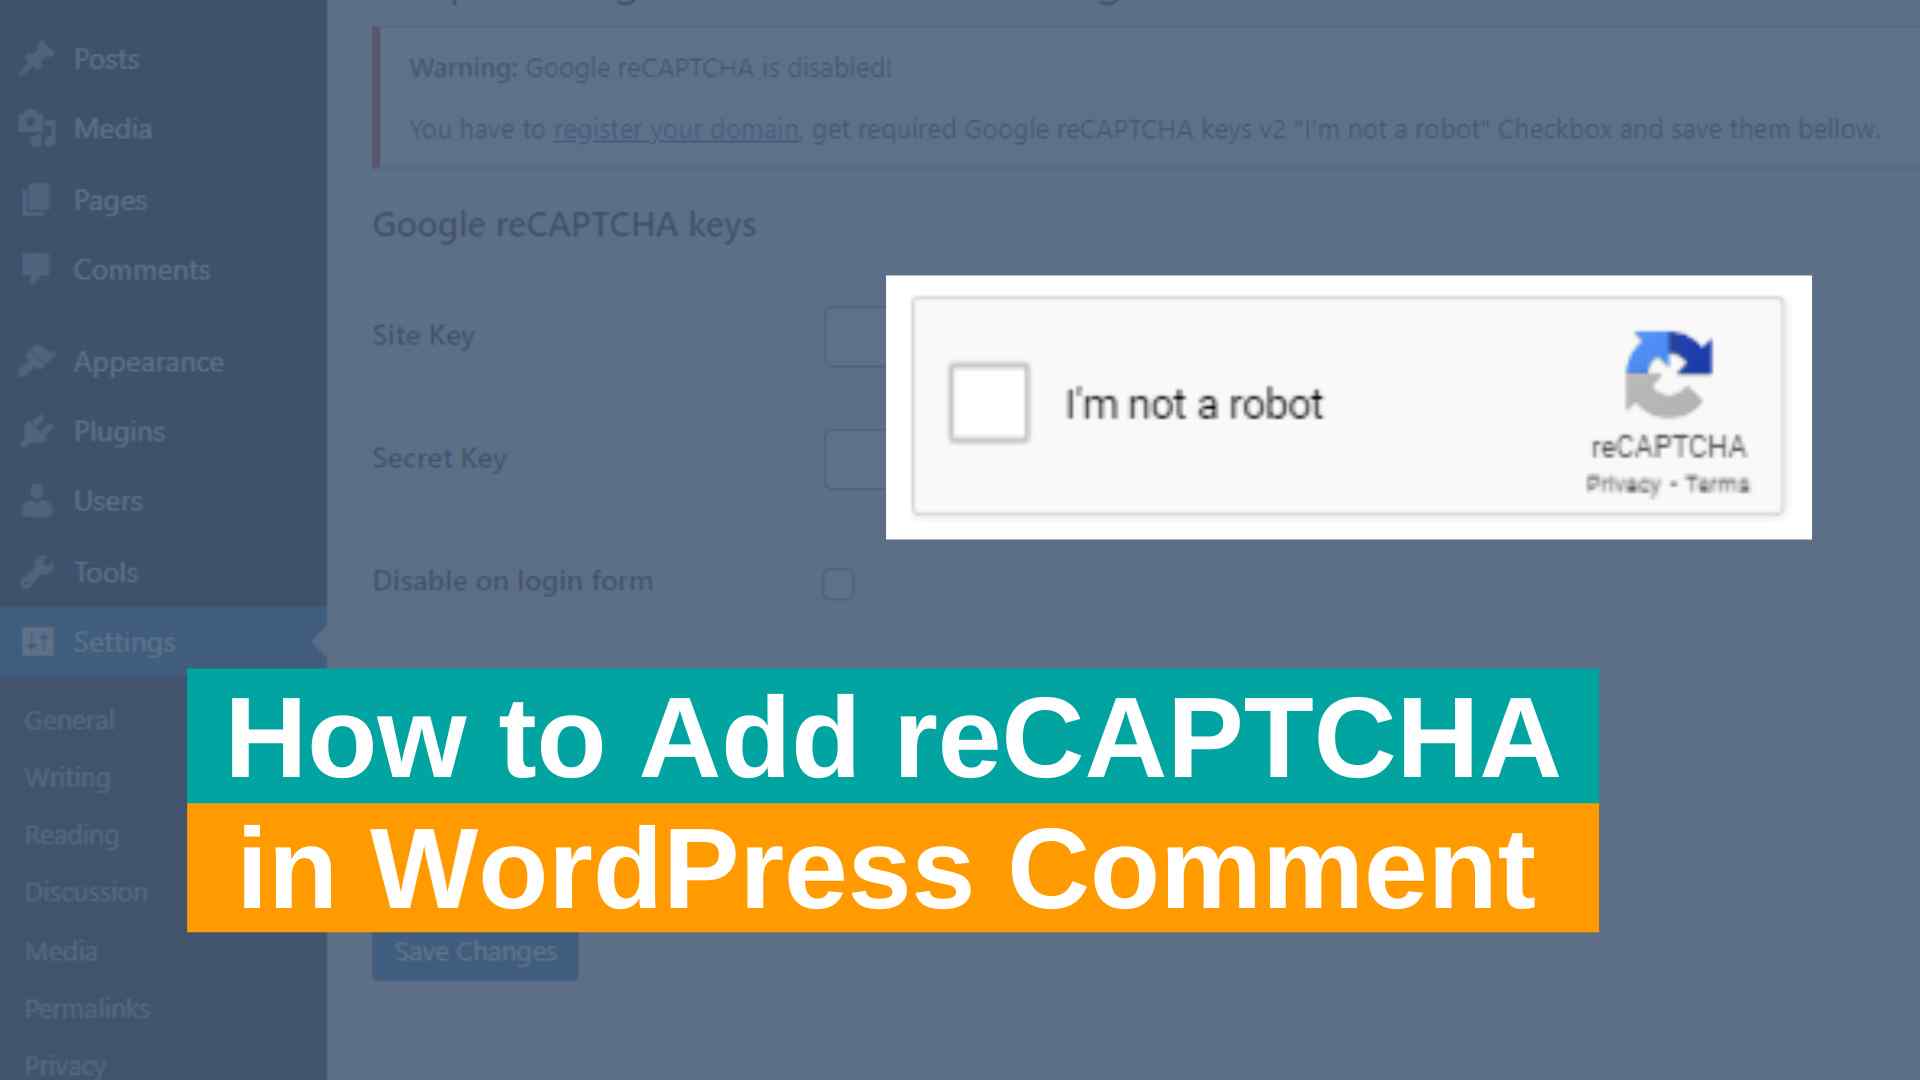 How to Add reCAPTCHA in WordPress Comment